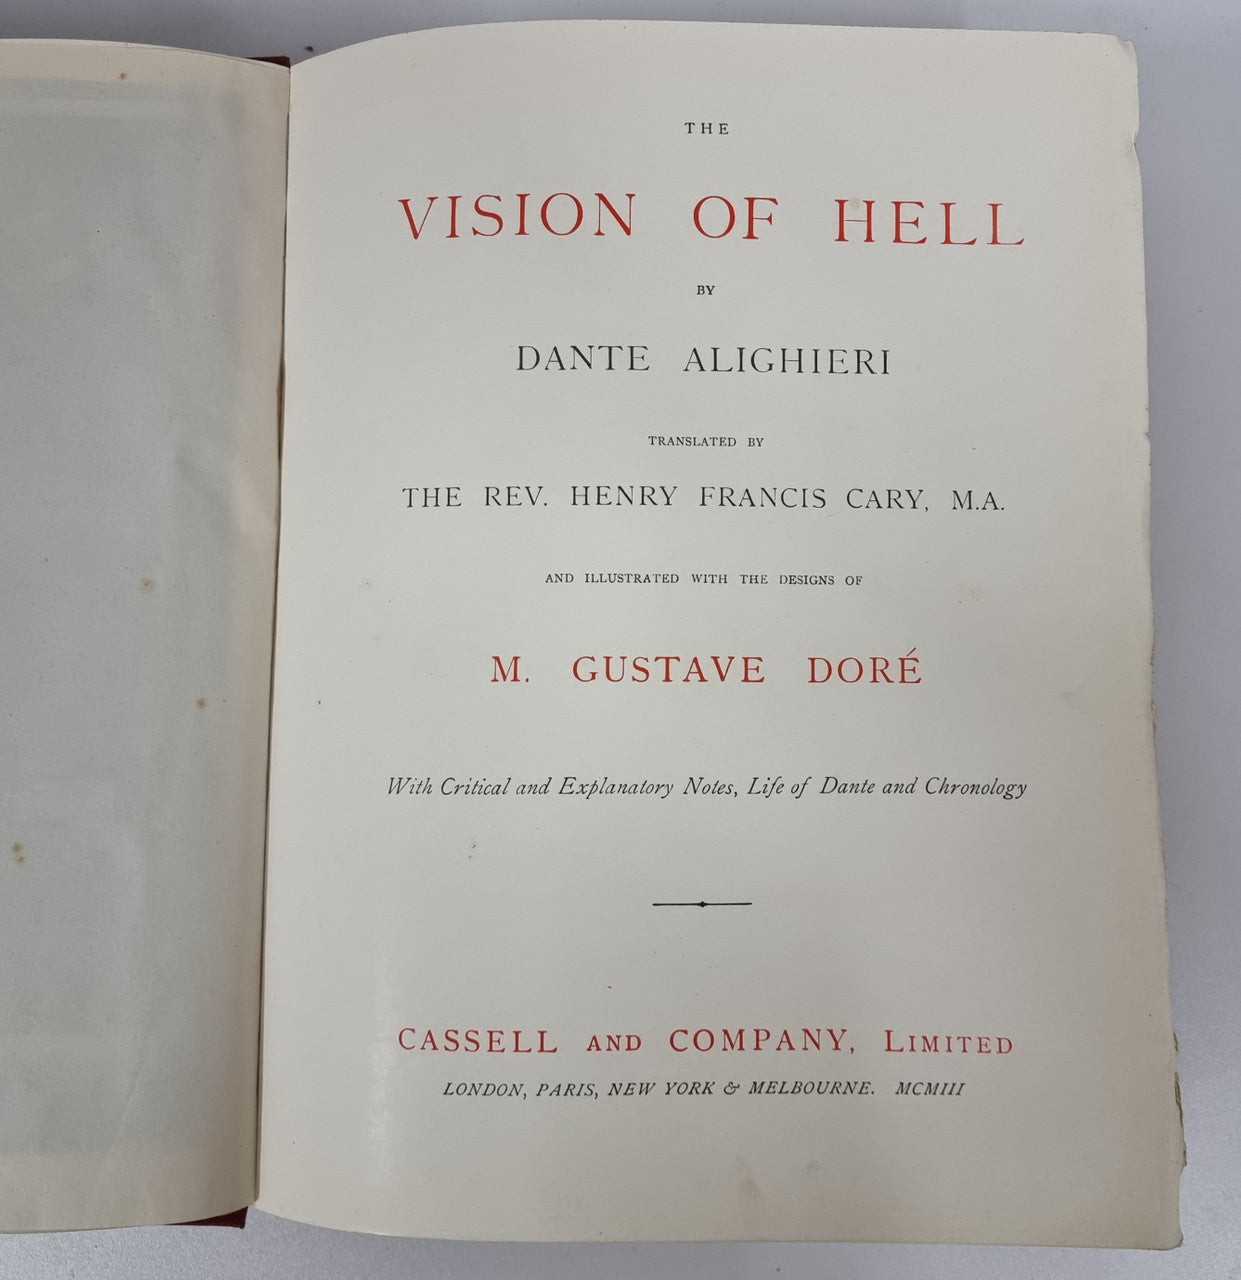 Dantes The Vision of Purgatory & Paradise together with The Vision of Hell 2 Volumes